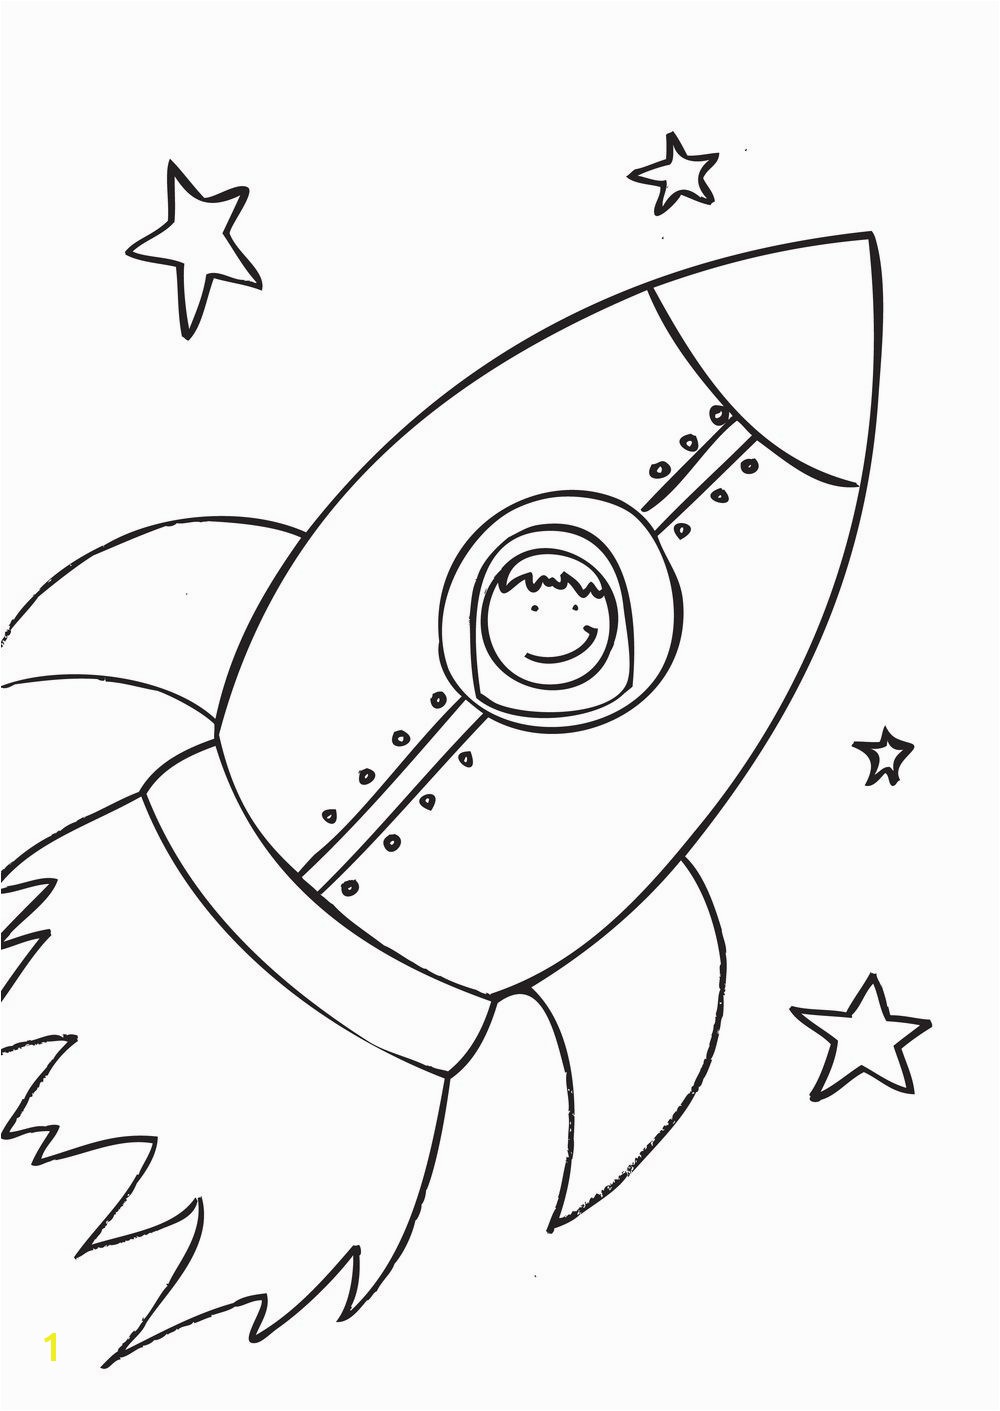 Free Rocket Ship Coloring Pages With Printable Rocket Ship Coloring Pages For Kids